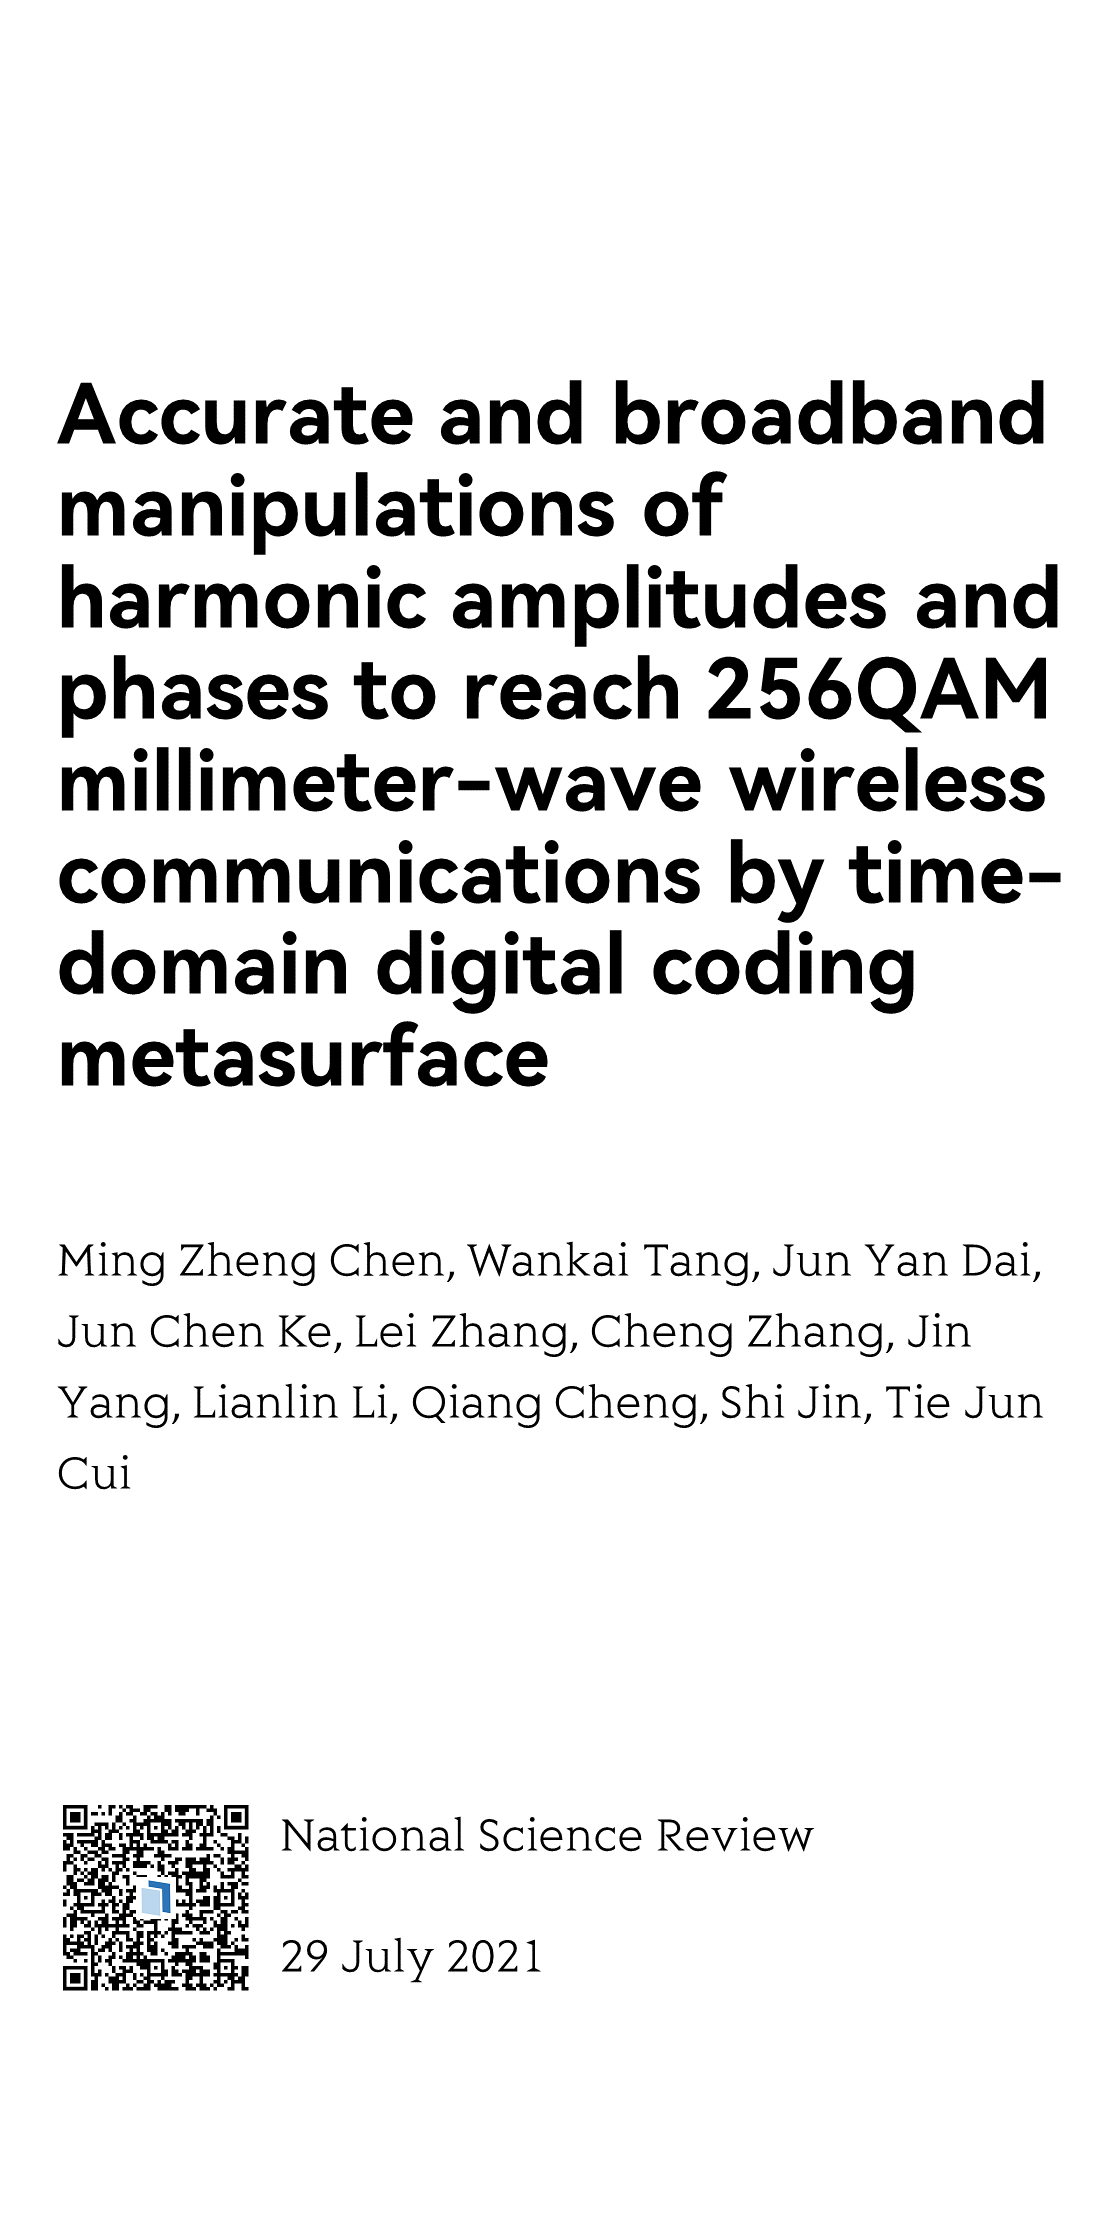 Accurate and broadband manipulations of harmonic amplitudes and phases to reach 256QAM millimeter-wave wireless communications by time-domain digital coding metasurface_1